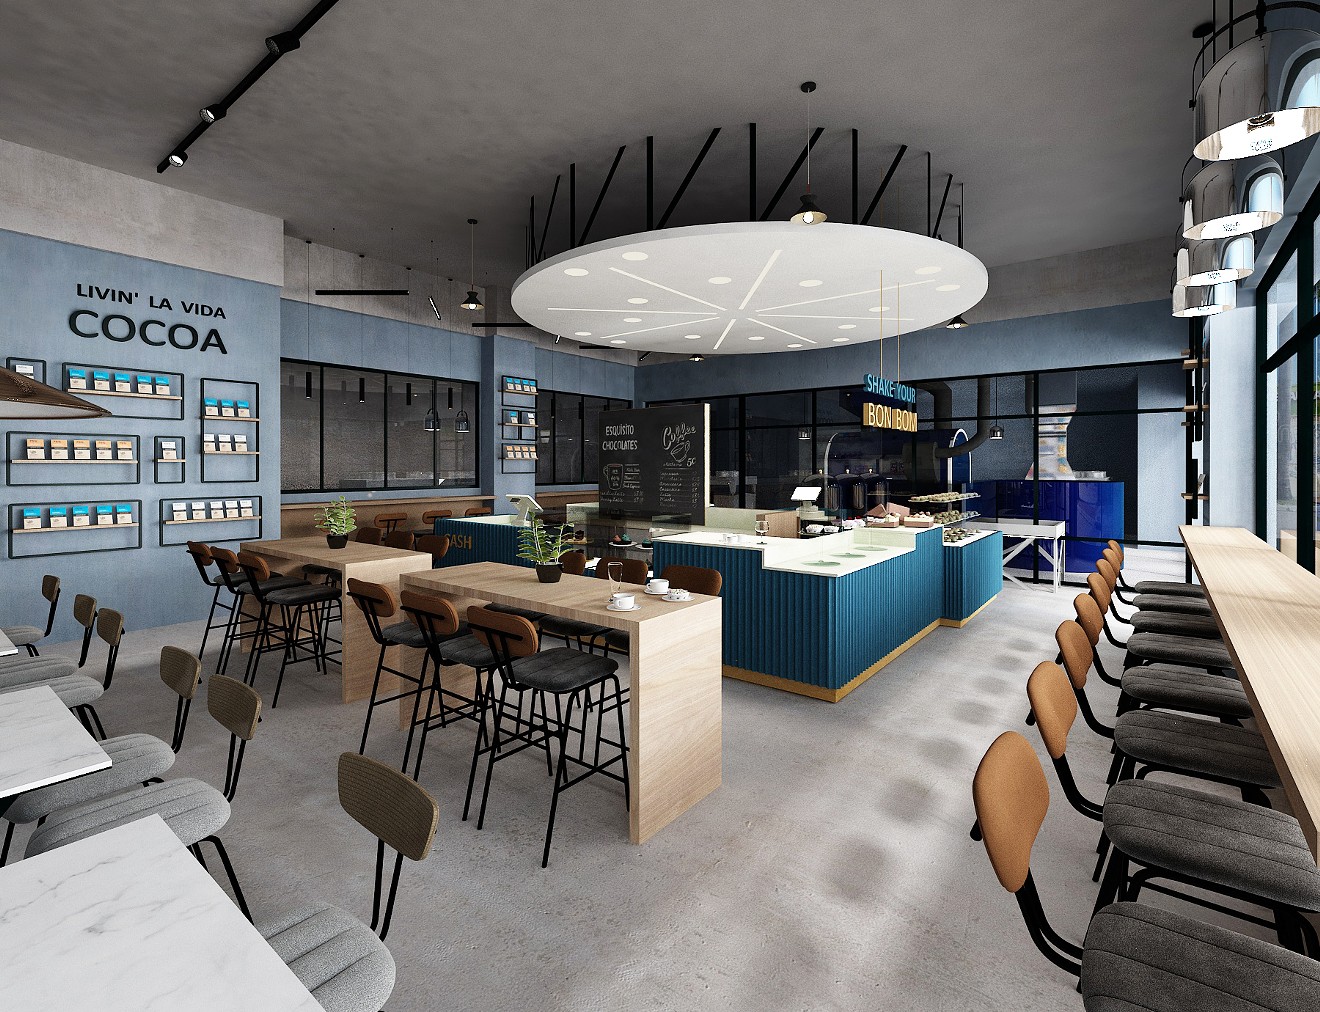 An Urban Chocolate Factory to Come to Little Havana